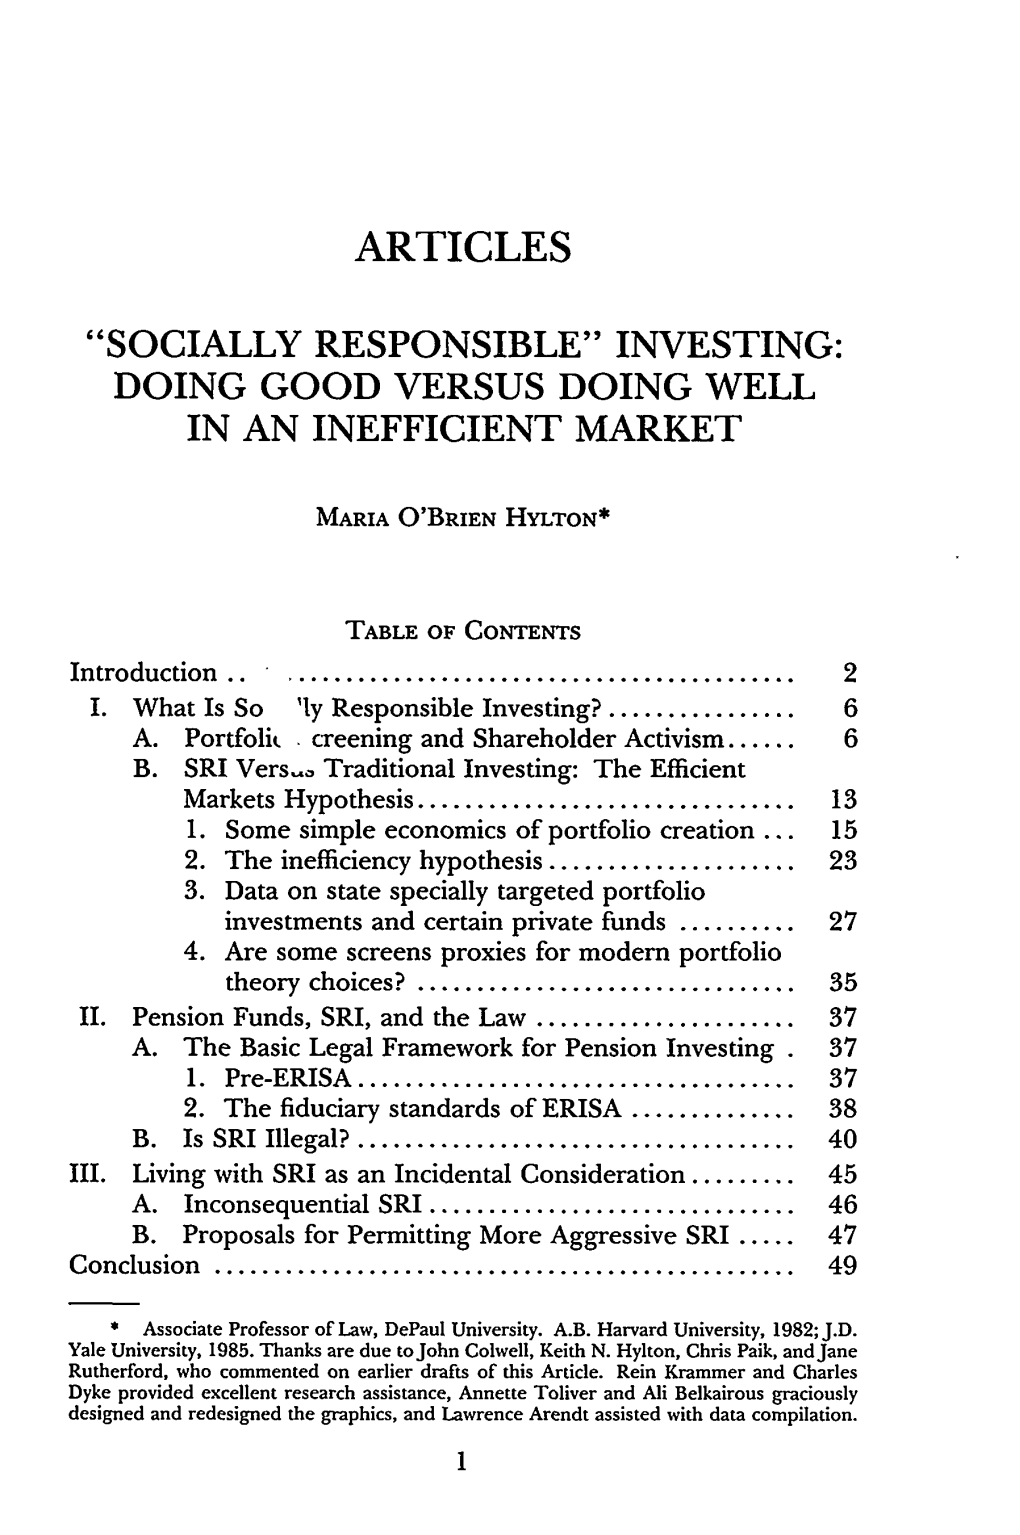 "Socially Responsible" Investing: Doing Good Versus Doing Well in an Inefficient Market